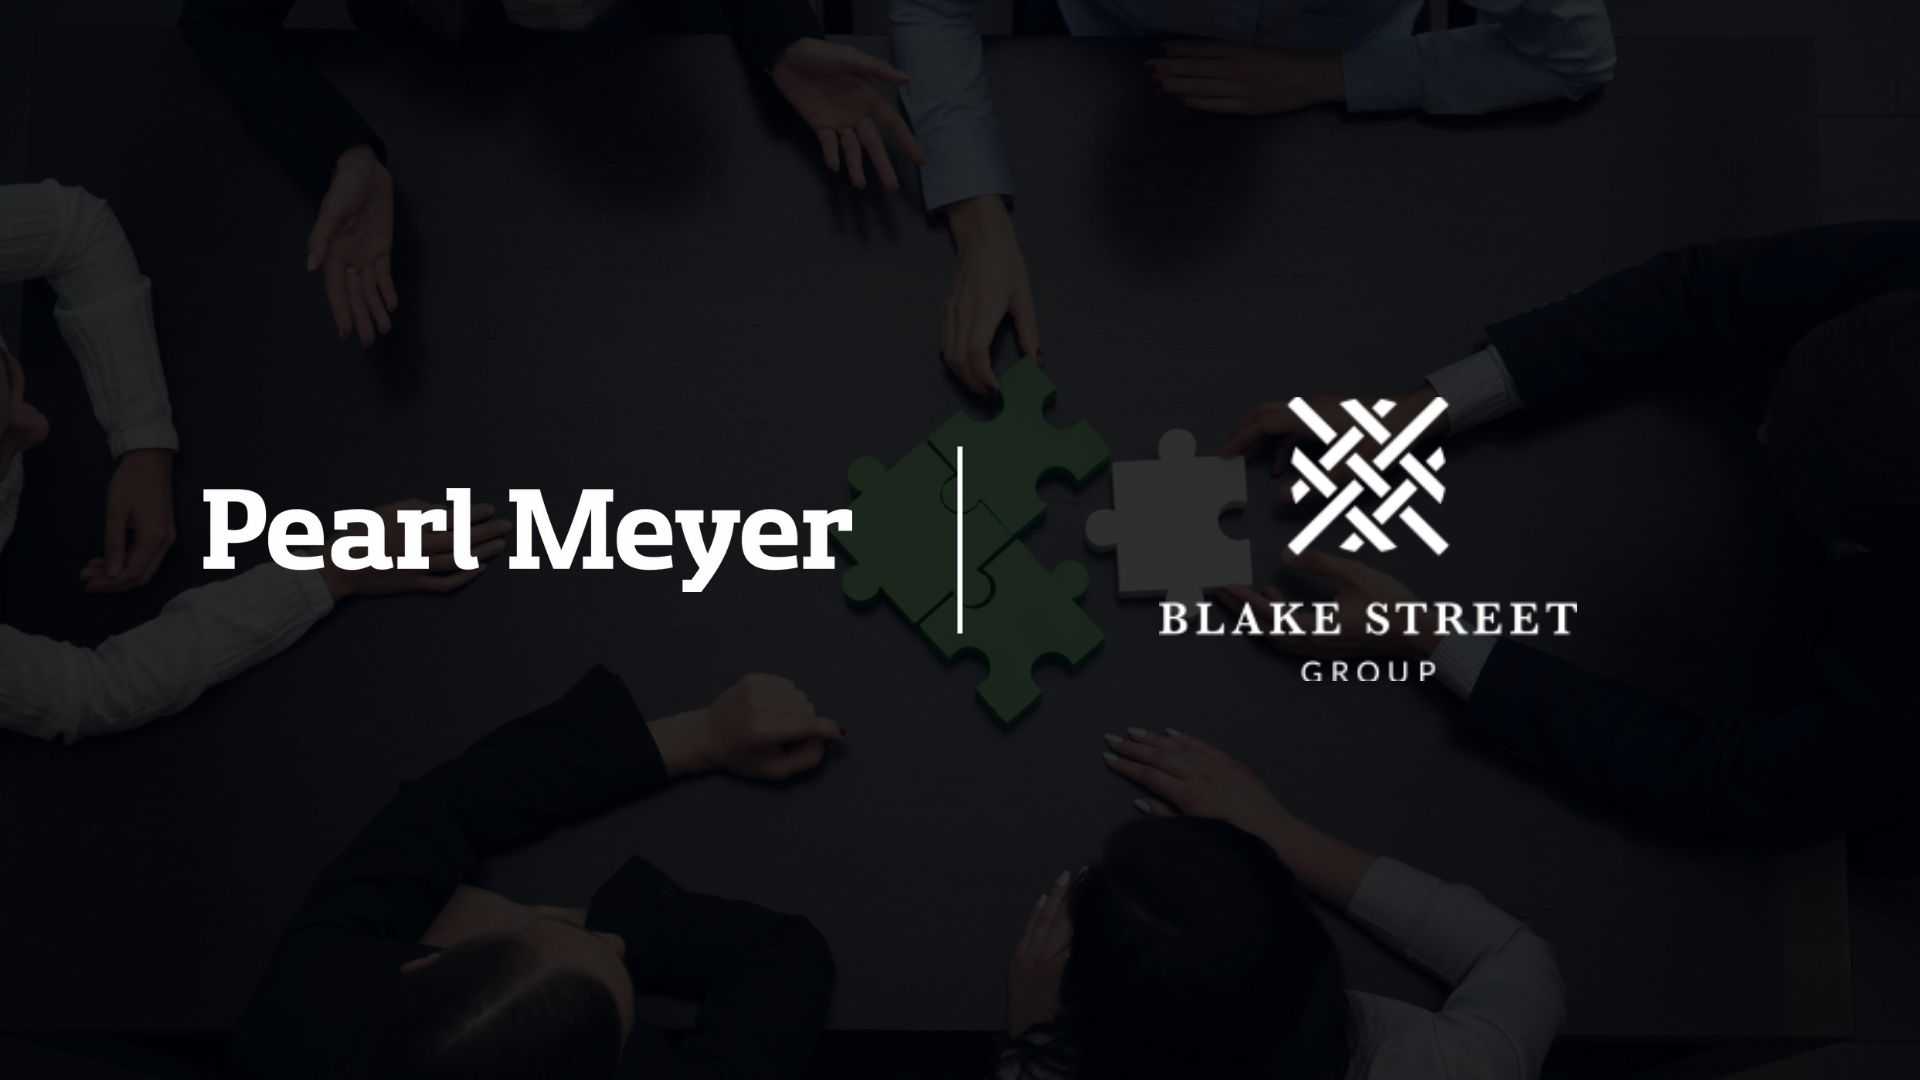 Pearl Meyer Acquires Blake Street Group to Enhance PE-Focused Leadership Consulting